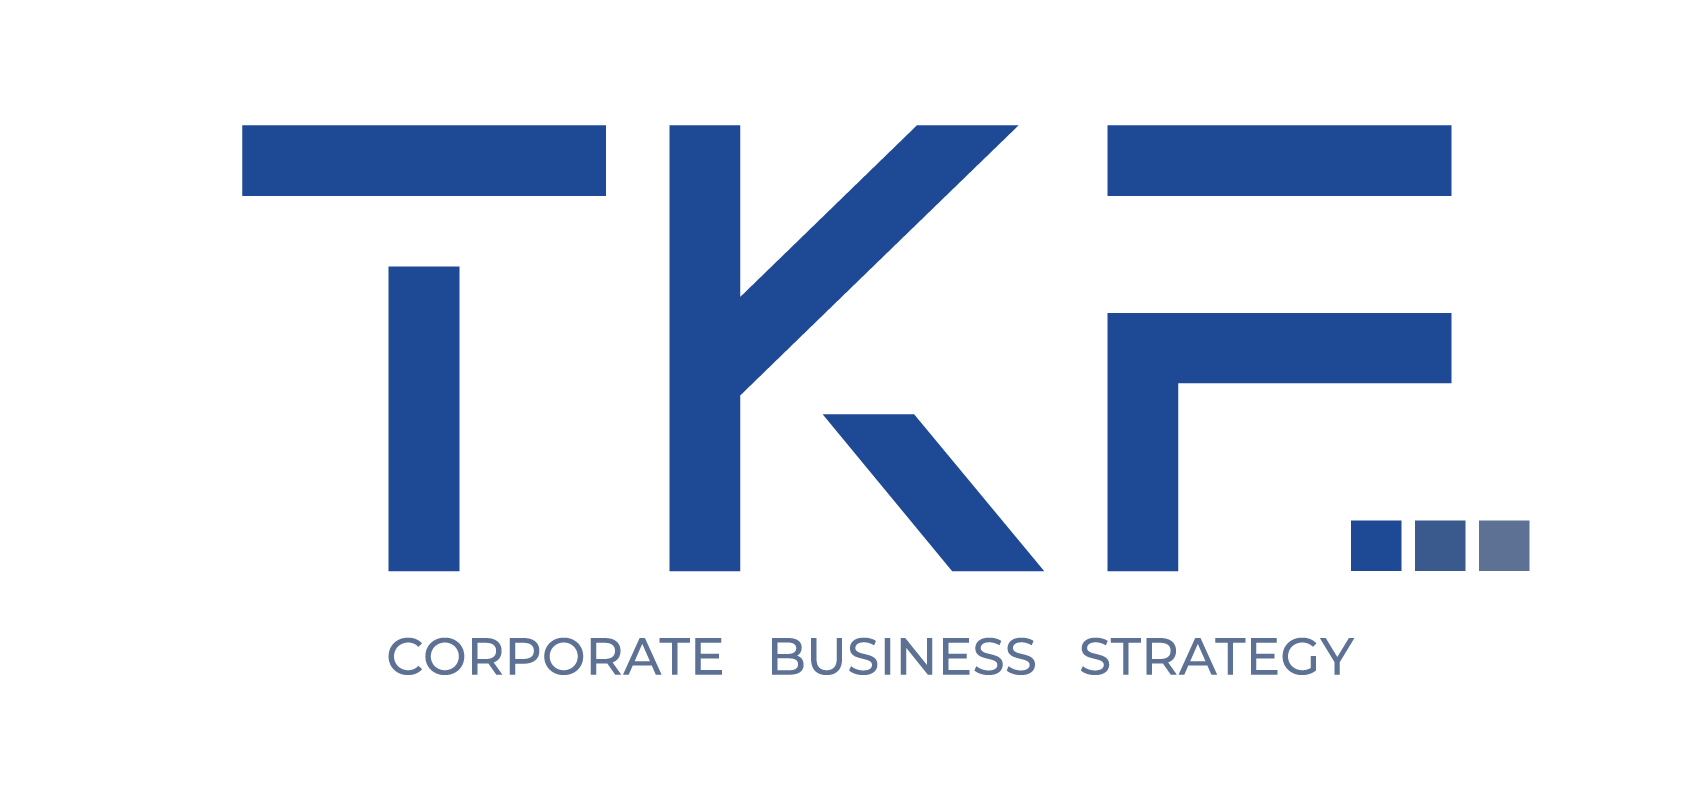 TKF 3 is the fruit of the union of three expertise who along with other Italian and foreign collaborators, have decided to make available to companies a new method of growth and development, thanks to their know-how and experience.